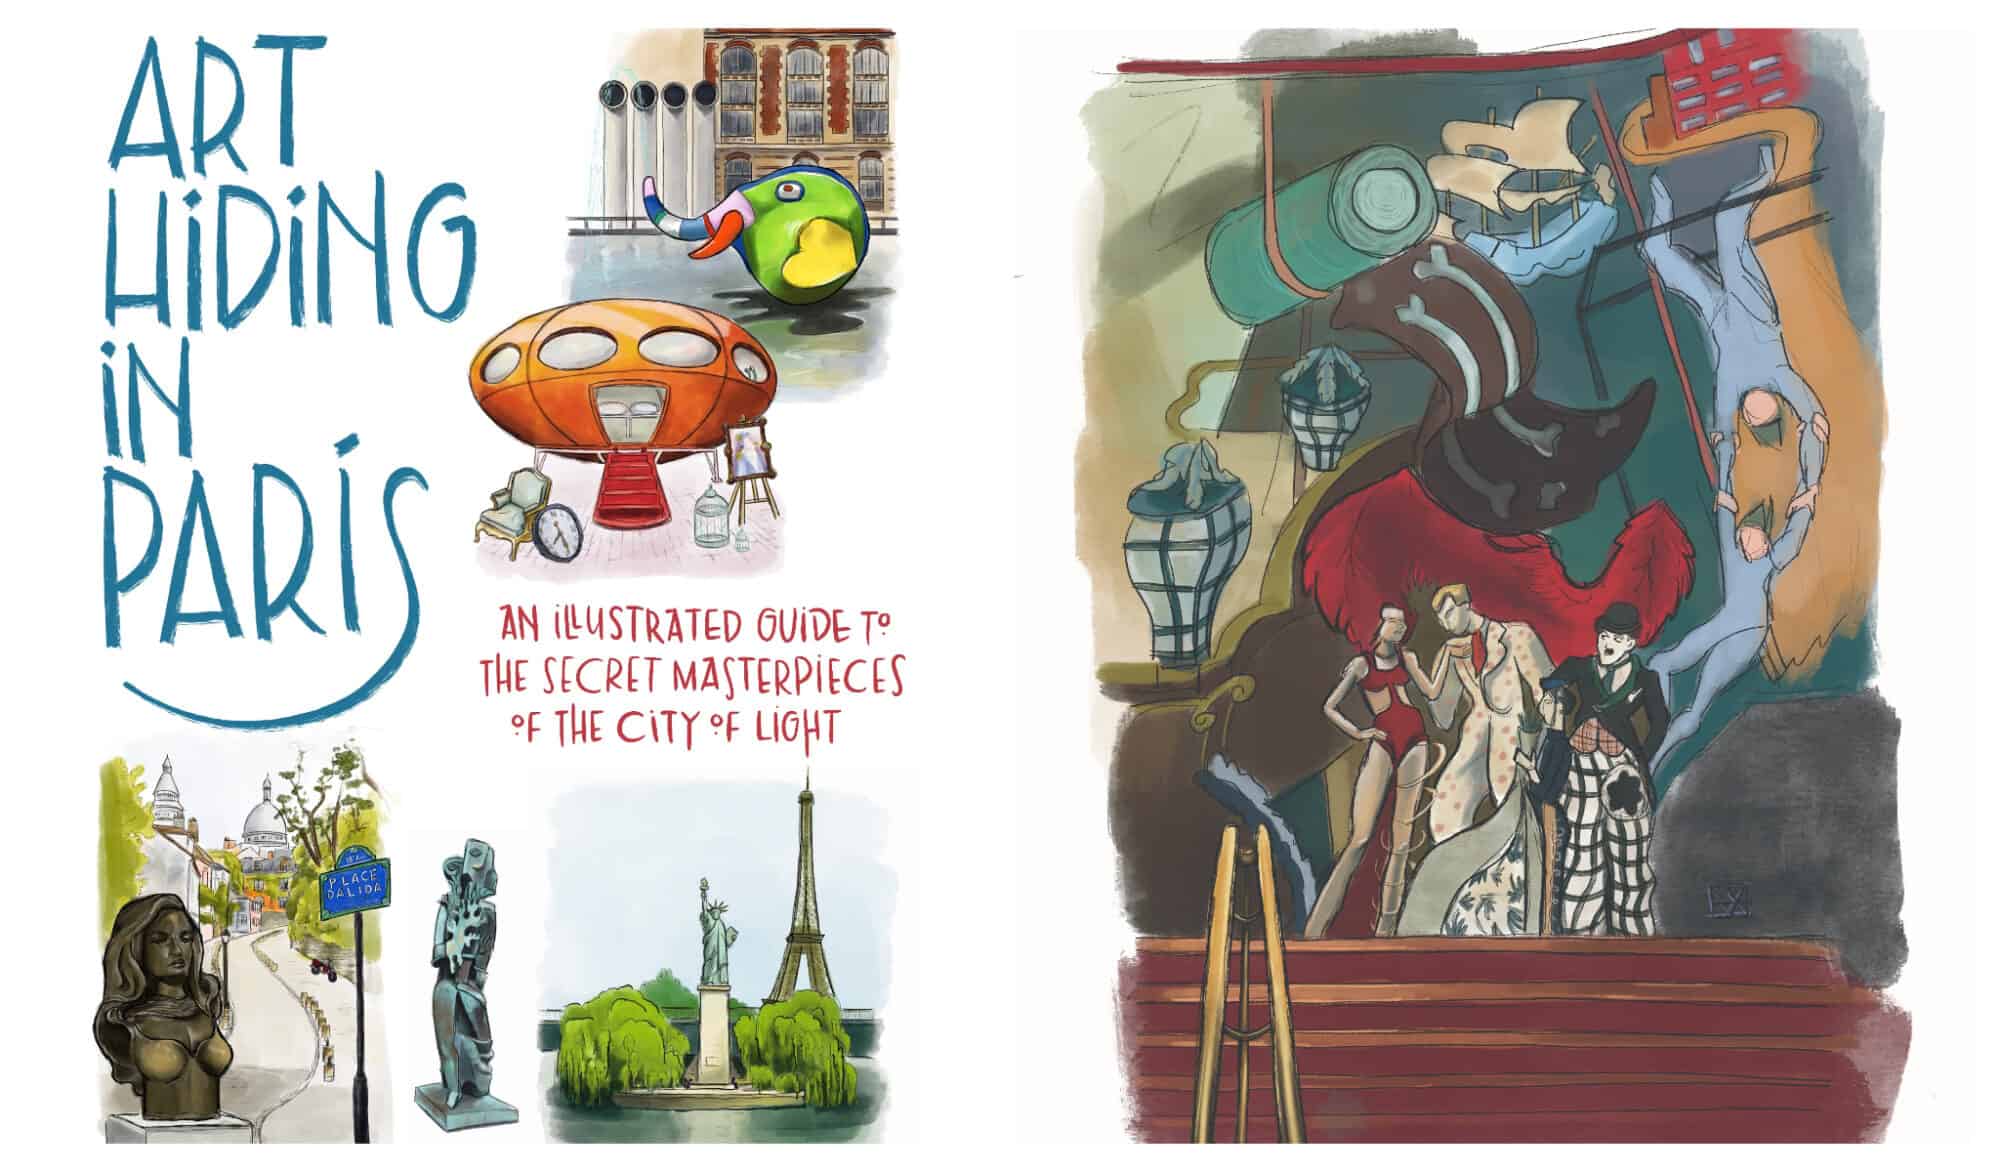 Illustrations from the book Art Hiding in Paris.